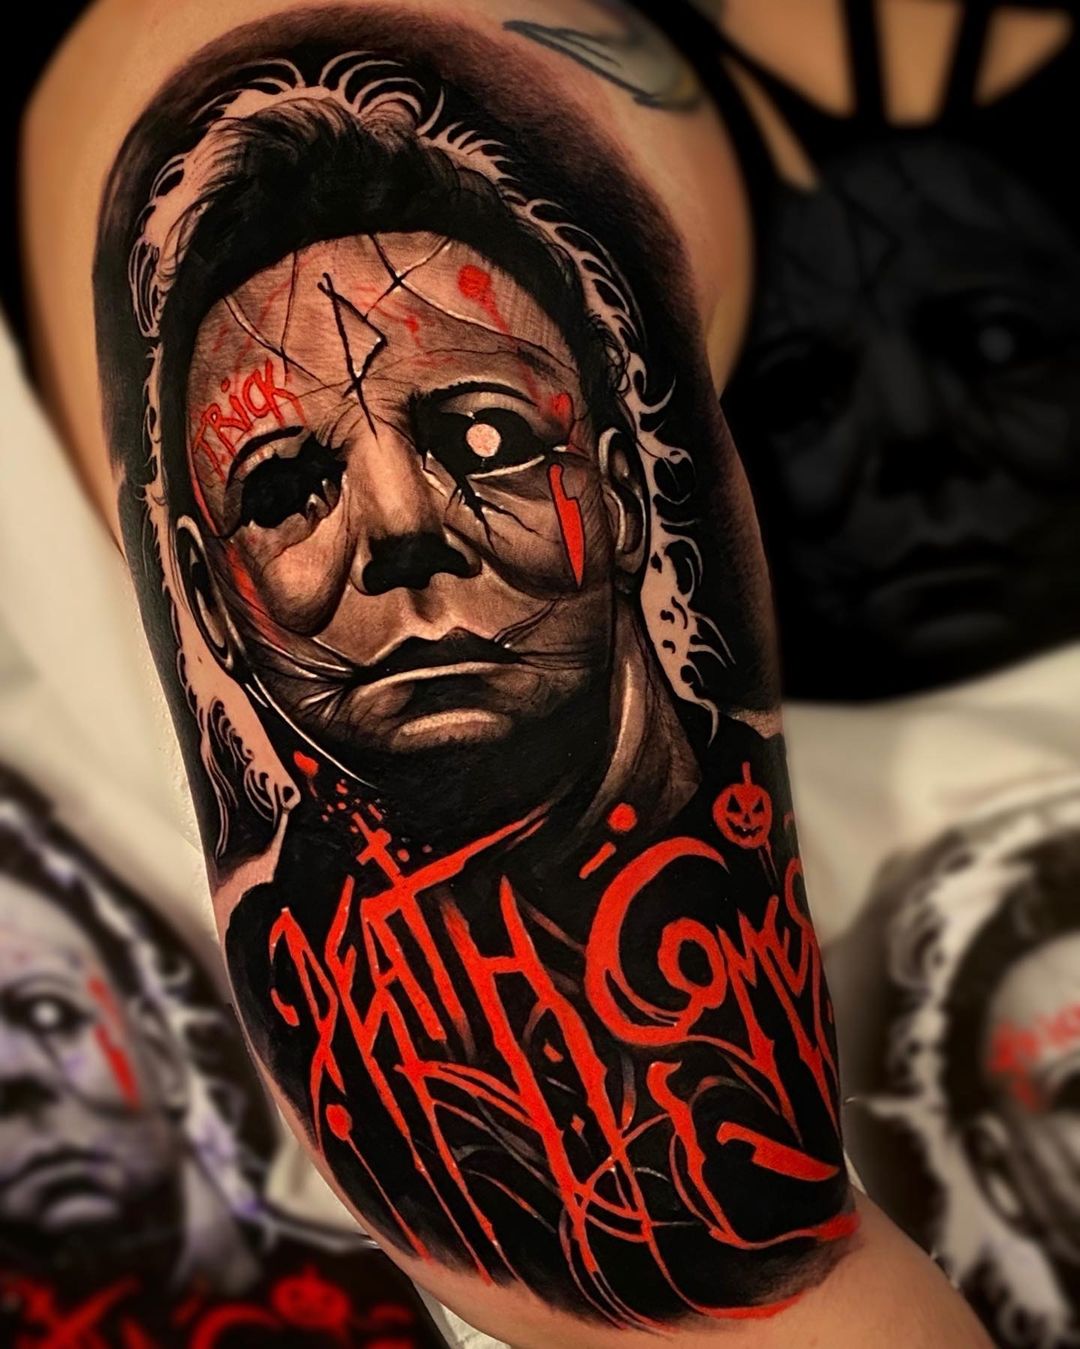 Gentleman Jims Tattoo Club  Started a horror movie leg today with Mickey  Myers  Michael Myers Halloween  tattoo tattoos tattooed tattooart  tattooartist tattoooftheday potd picoftheday art artist halloween  michaelmyers halloweentattoo 